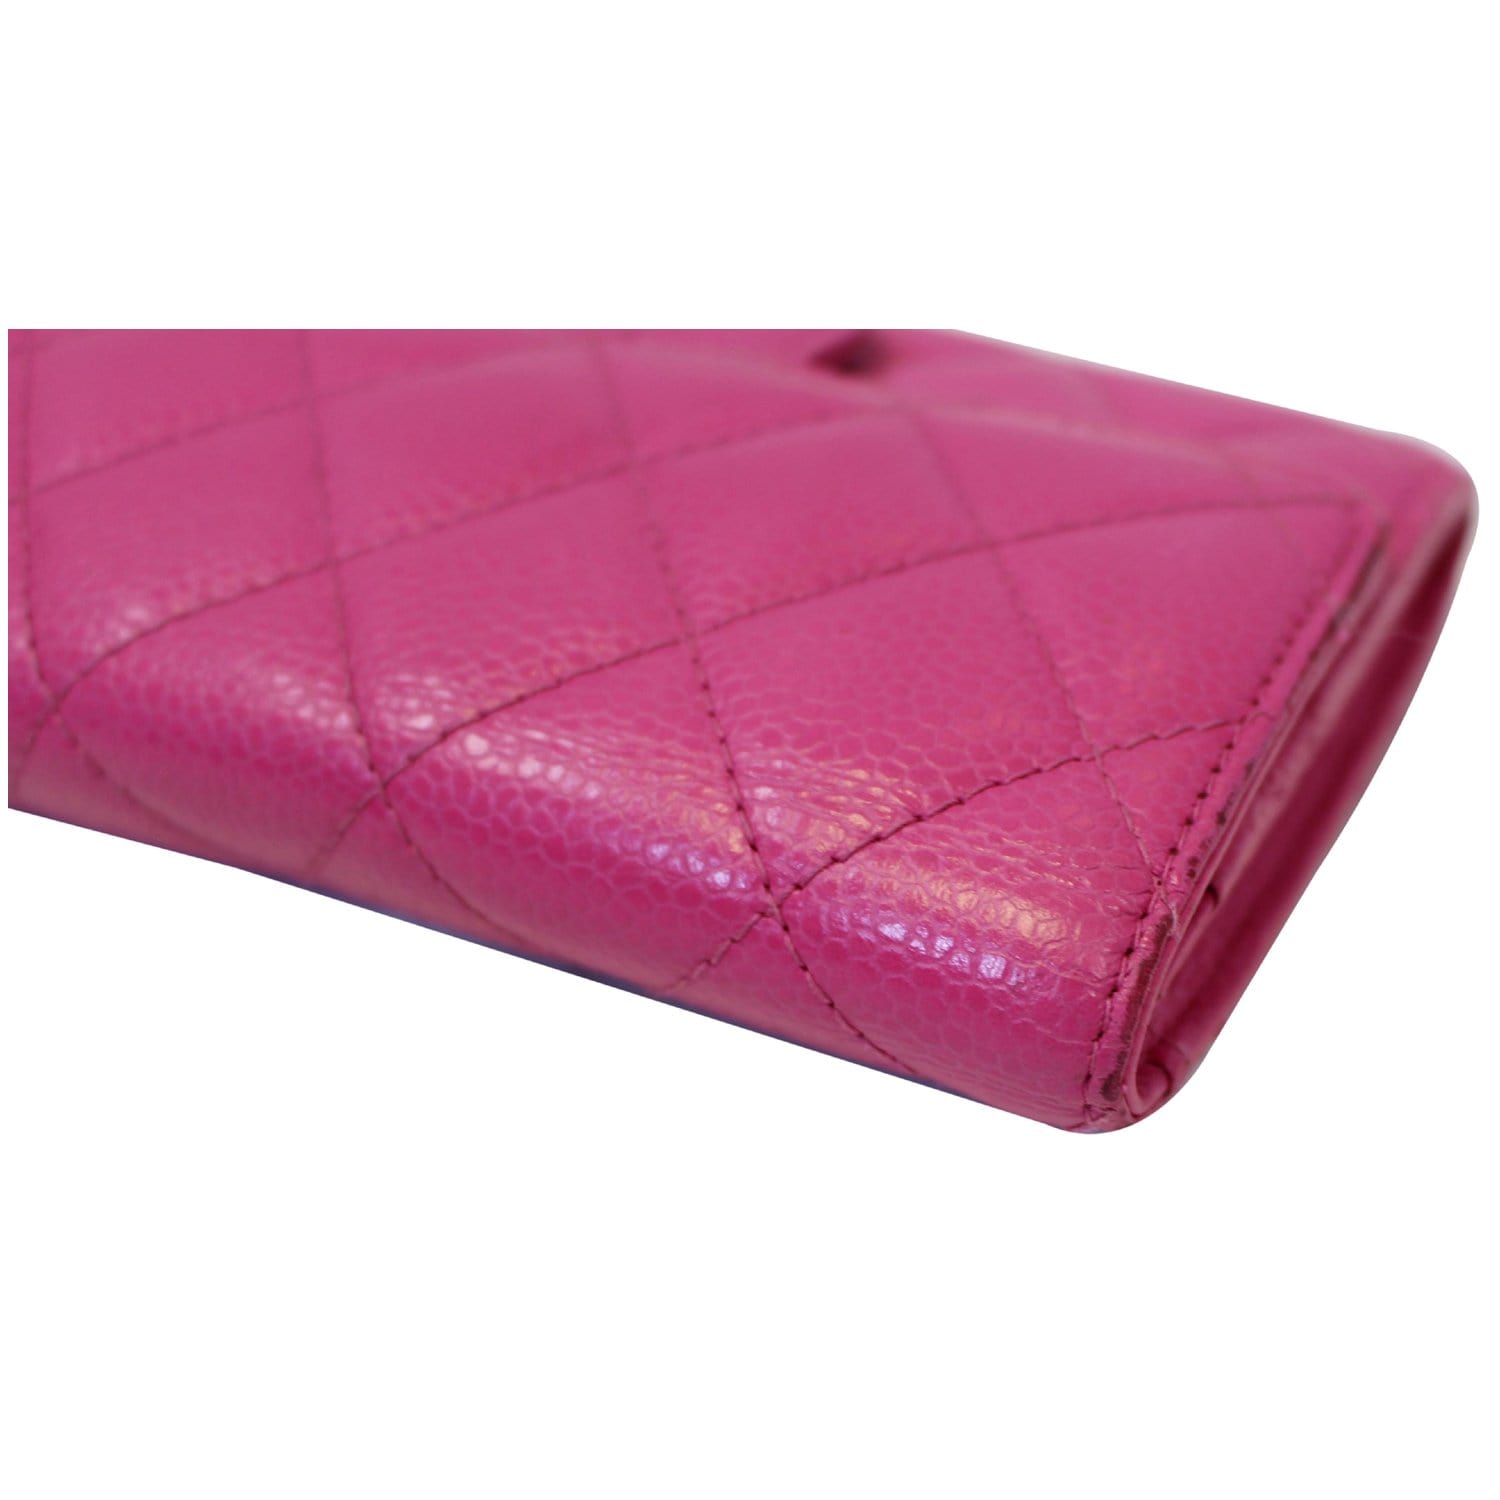 Timeless/classique leather wallet Chanel Pink in Leather - 35884908